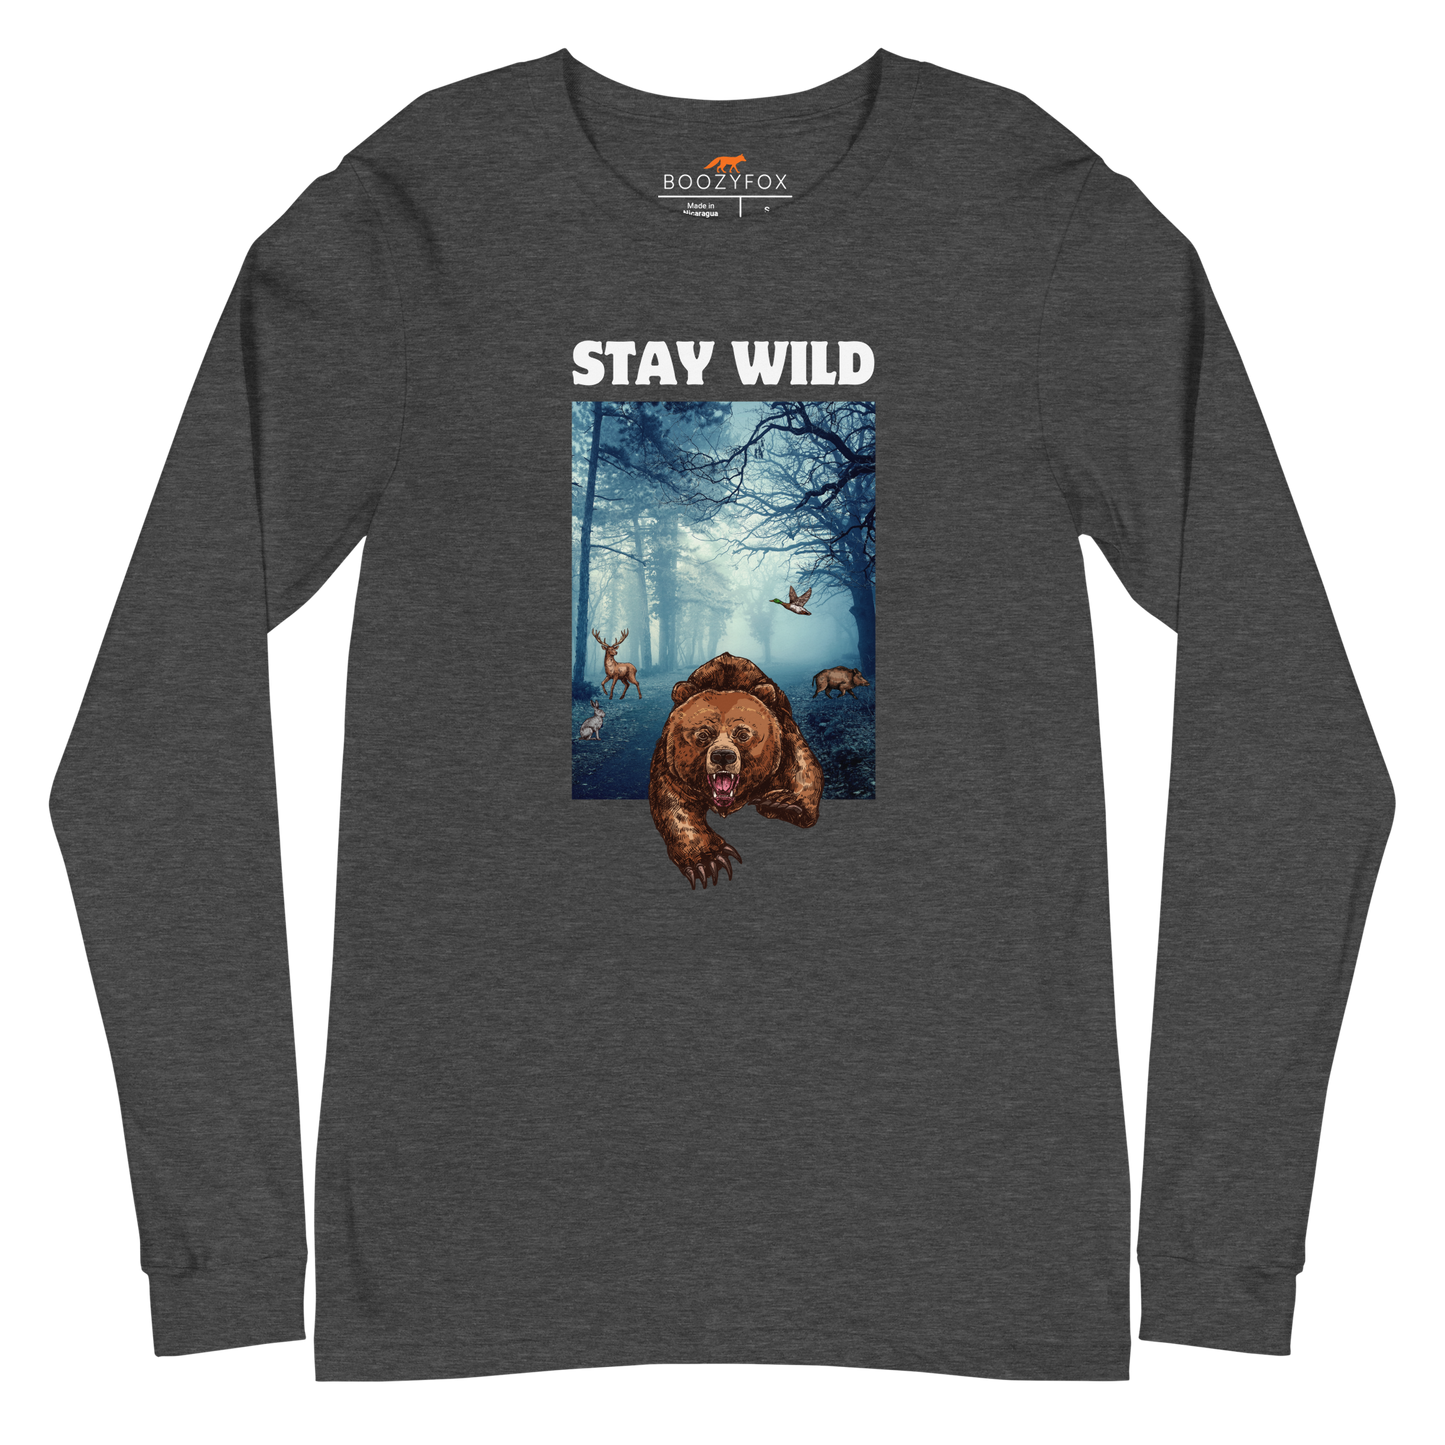 Dark Grey Heather Bear Long Sleeve Tee featuring a Stay Wild graphic on the chest - Cool Bear Long Sleeve Graphic Tees - Boozy Fox